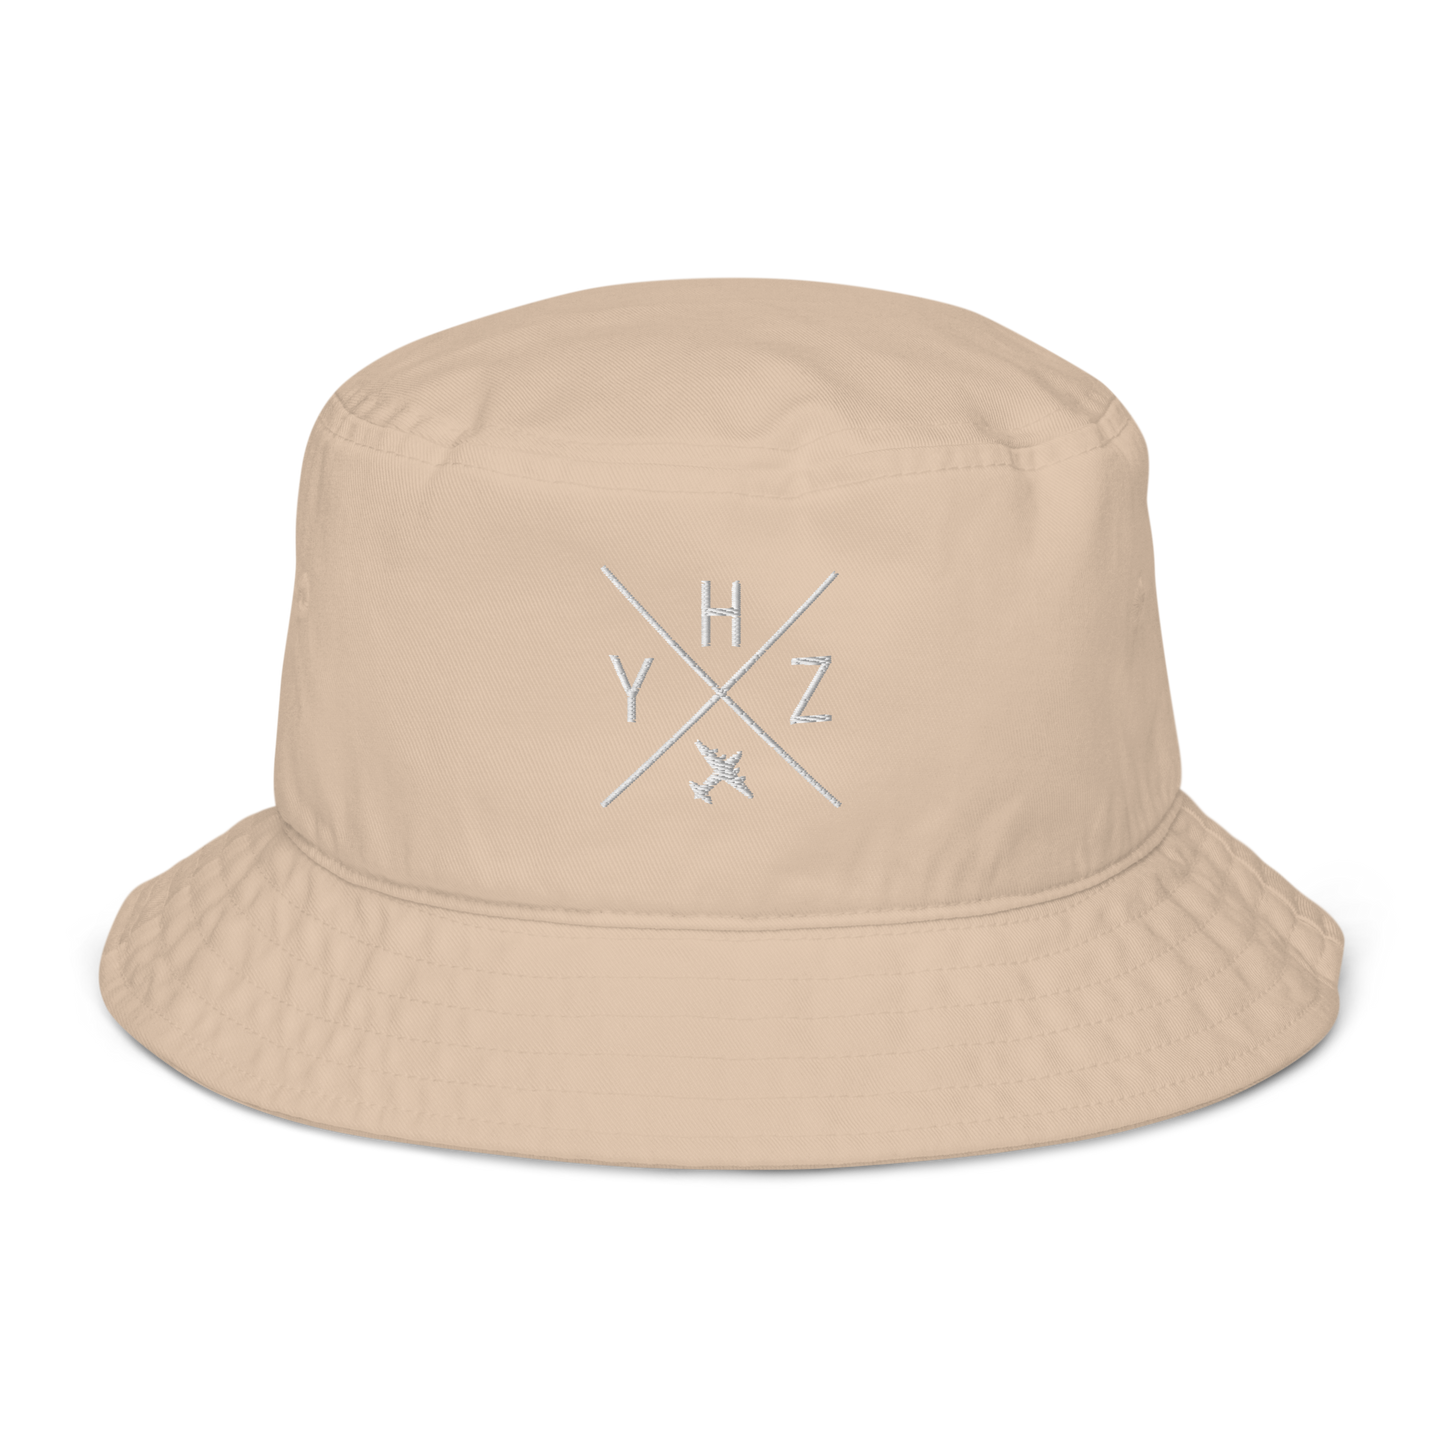 YHM Designs - YHZ Halifax Organic Cotton Bucket Hat - Crossed-X Design with Airport Code and Vintage Propliner - White Embroidery - Image 08